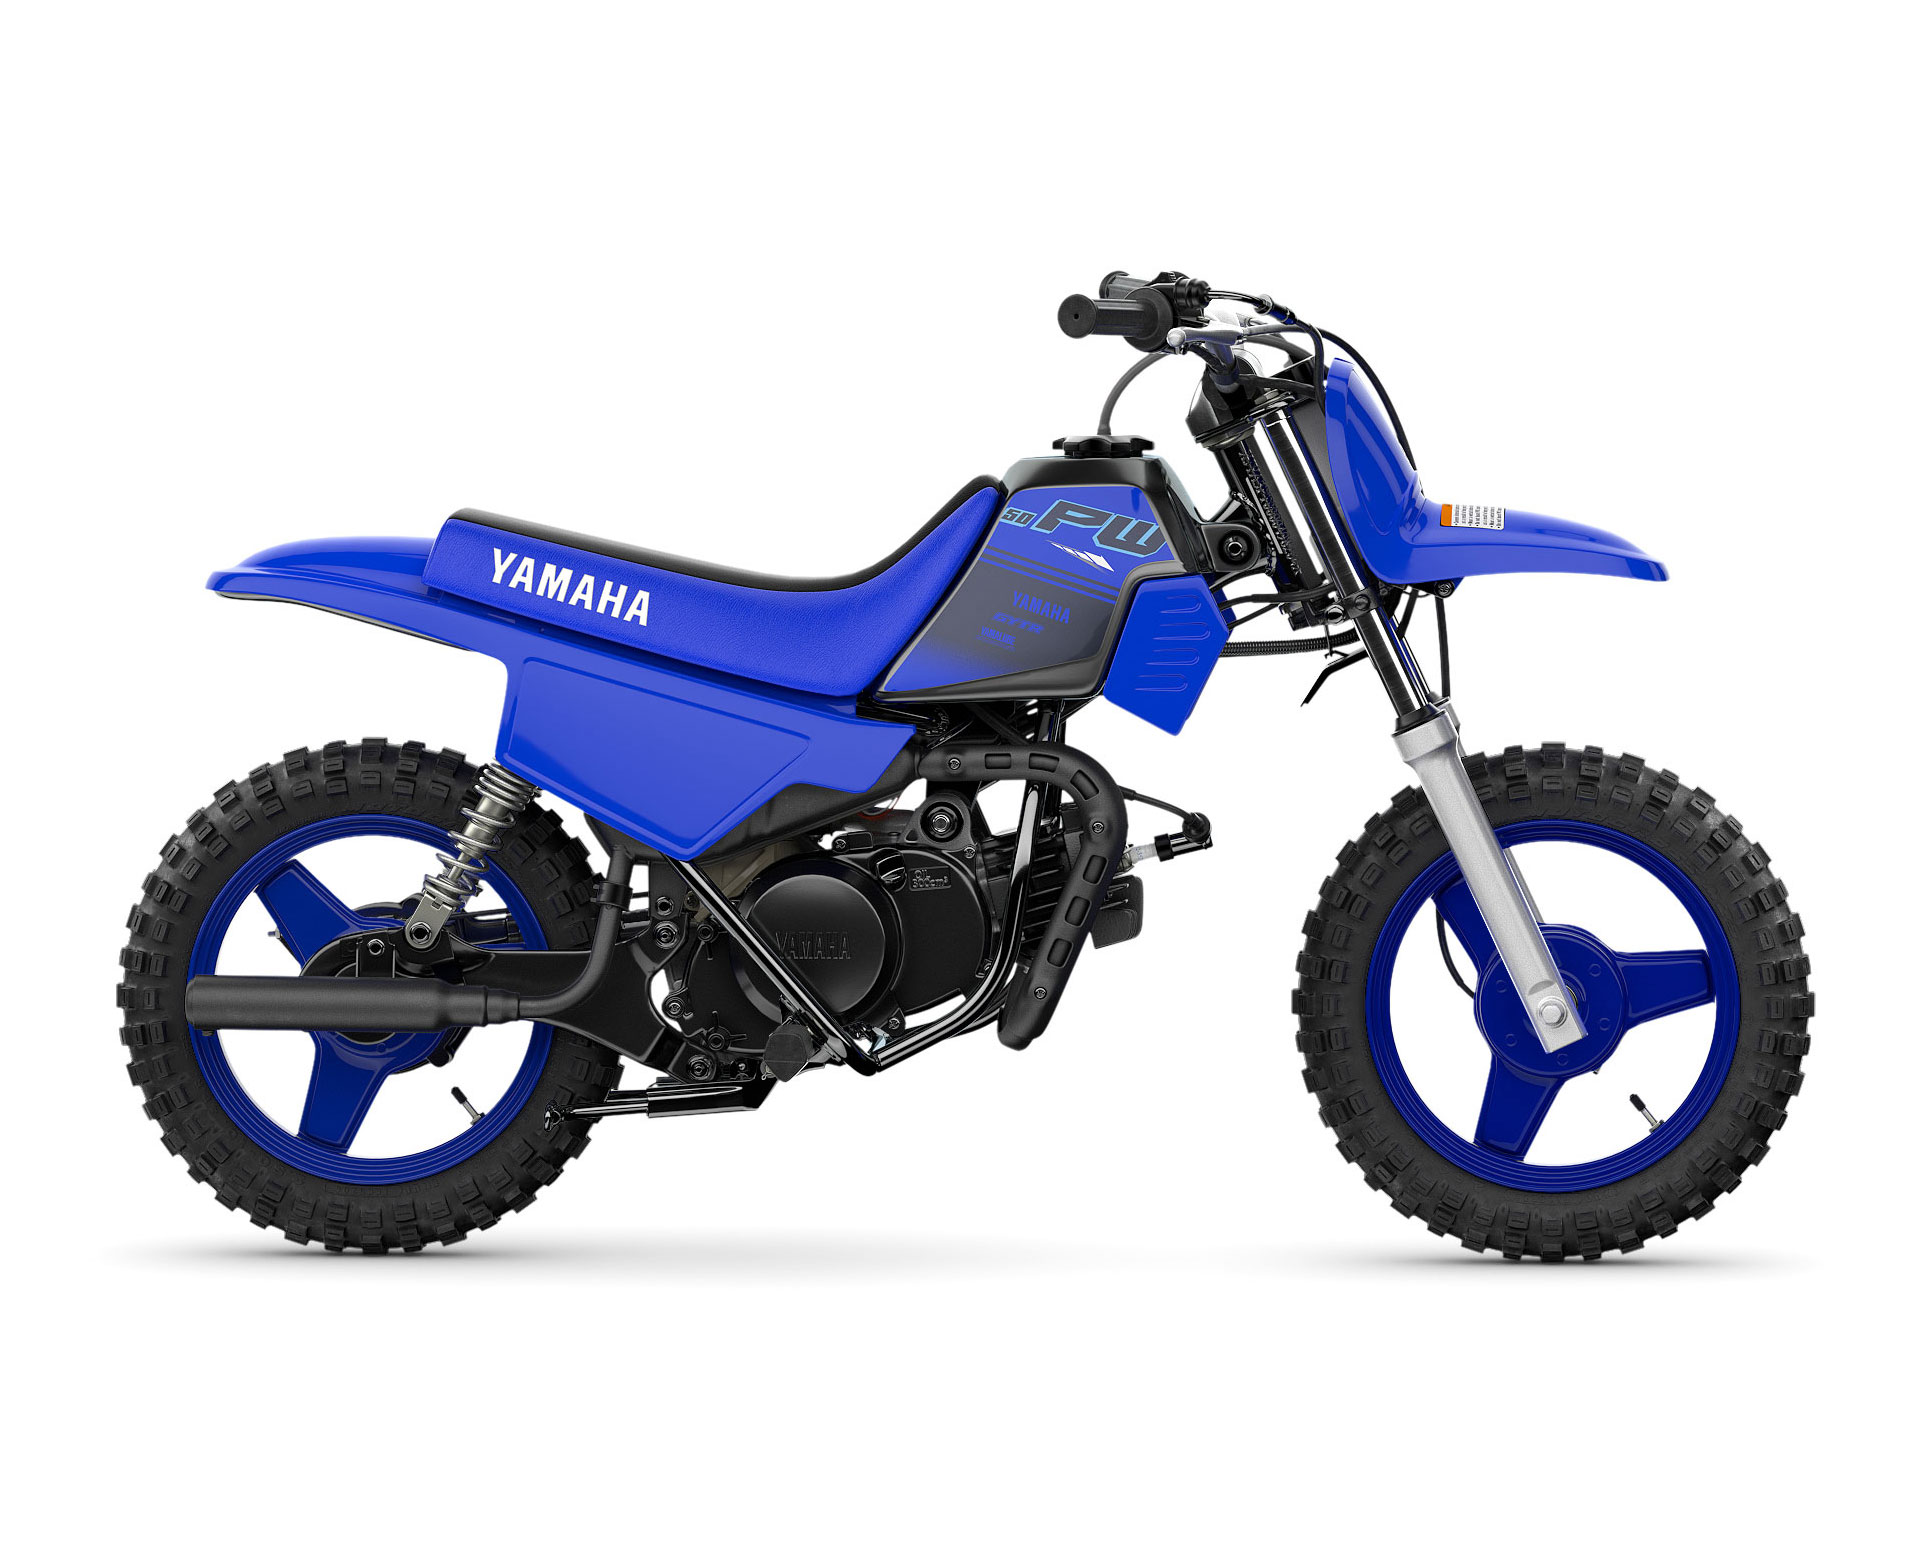 Thumbnail of your customized 2024 PW50